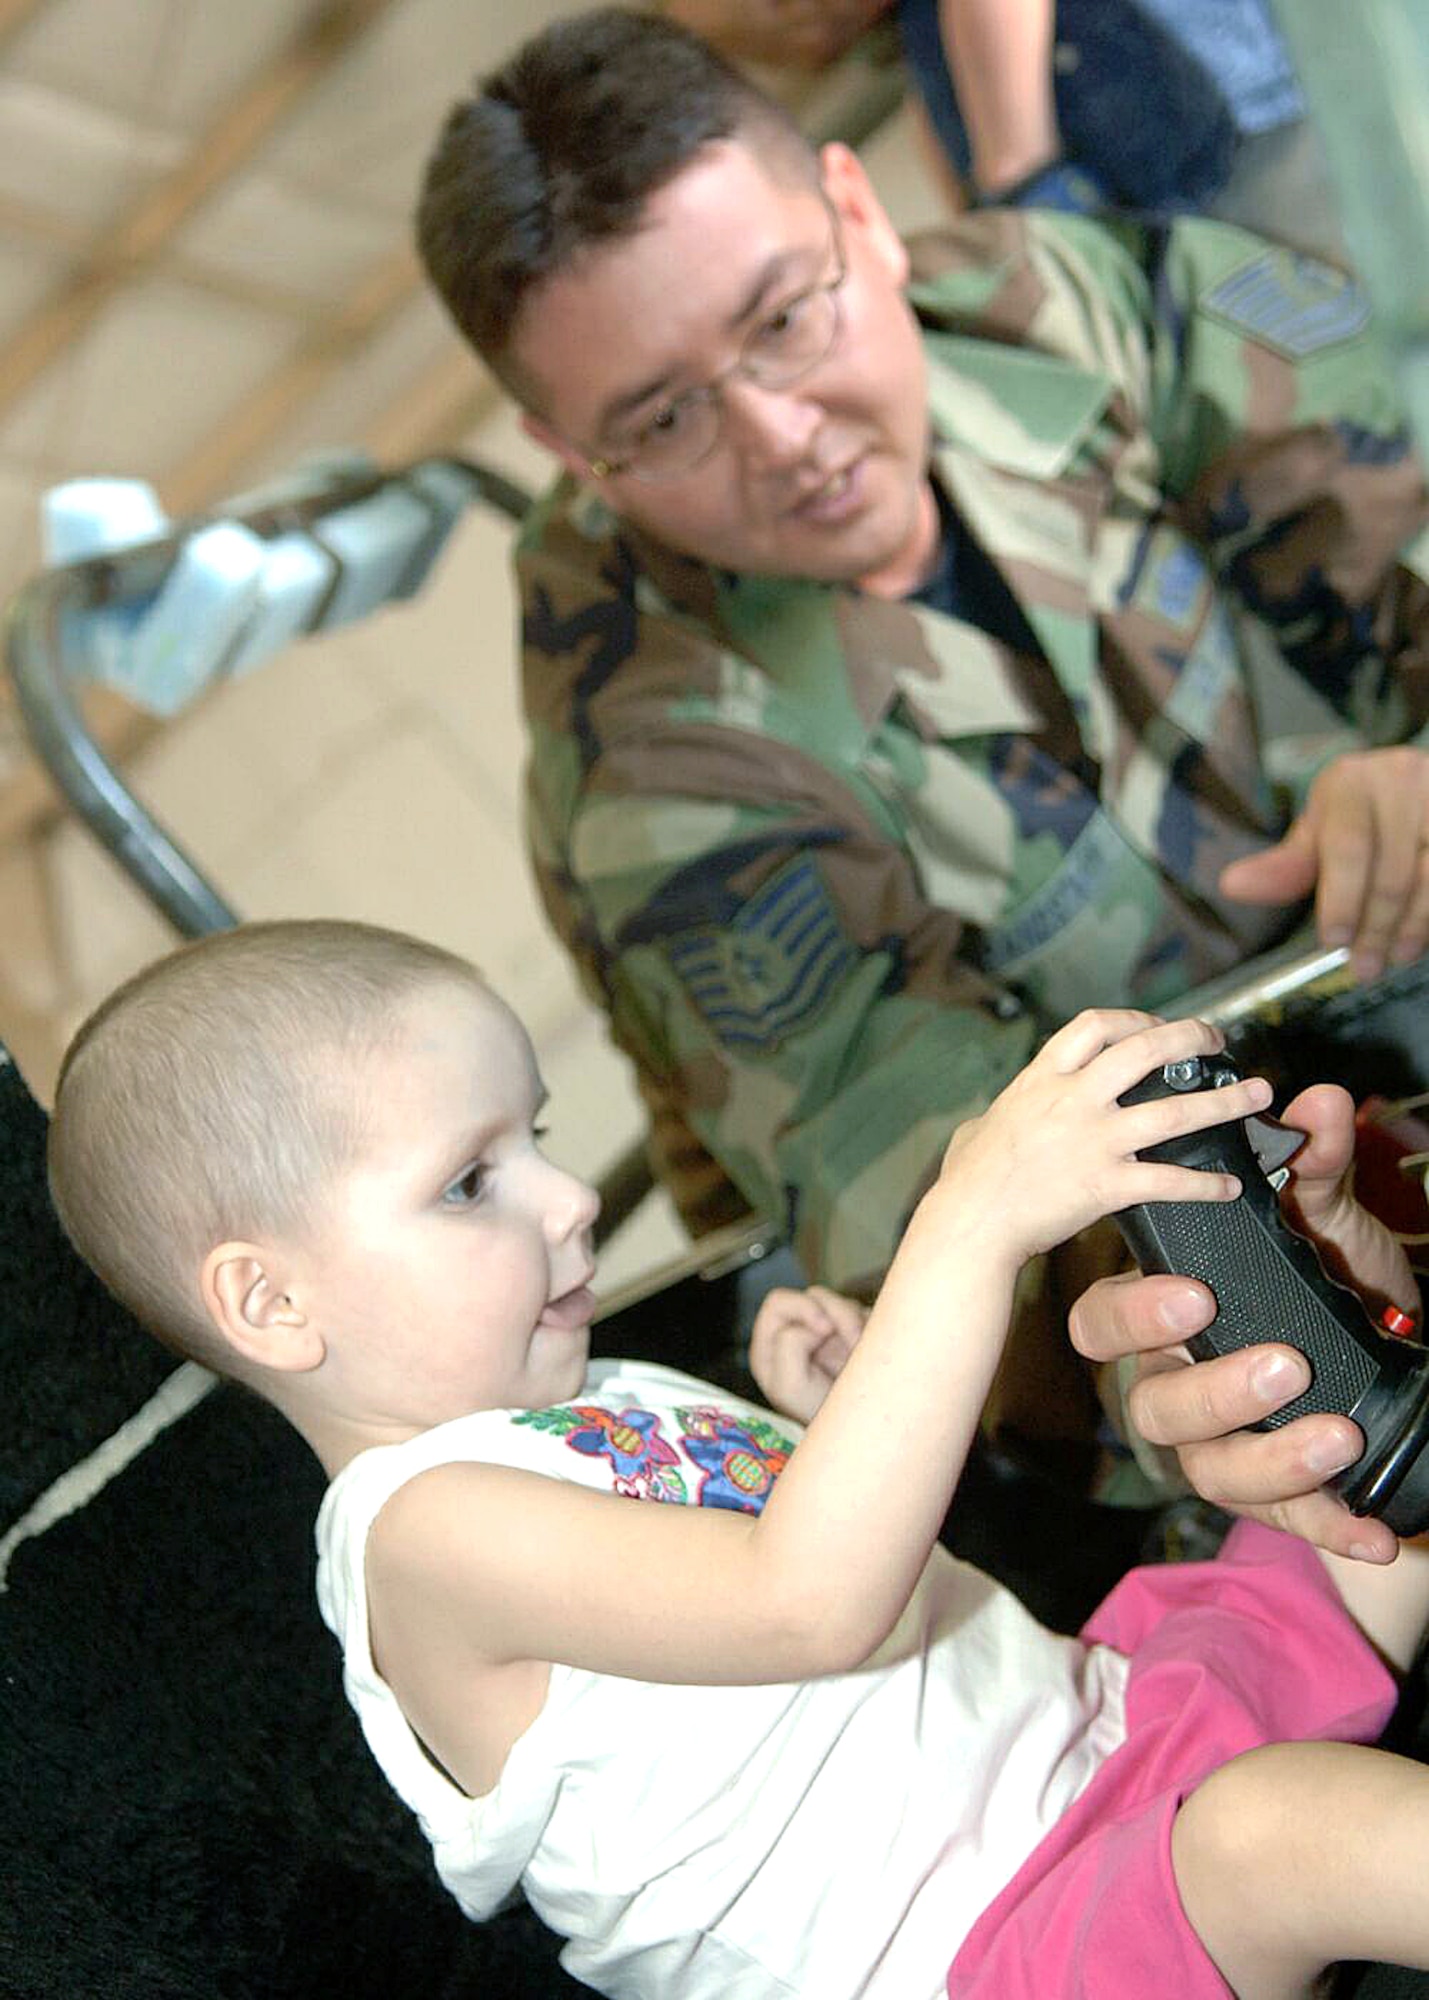 Tech. Sgt. Thomas Grandstaff shows 3-year-old Hannah Holguin the inside of the cockpit of an A-10 Thunderbolt II during a tour of Davis-Monthan Air Force Base, Ariz., on July 17. The Make-A-Wish Foundation teamed with Davis-Monthan to offer a tour of the base for Hannah and other Make-A-Wish children as well as their families. The tour consisted of demonstrations by an explosive ordnance disposal robot, base fire department and a weapons load crew for an A-10. Hannah is the daughter of Mark and Amy Holguin. Sergeant Grandstaff is with the 355th Maintenance Group. (U.S. Air Force photo/Senior Airman Christina D. Ponte)